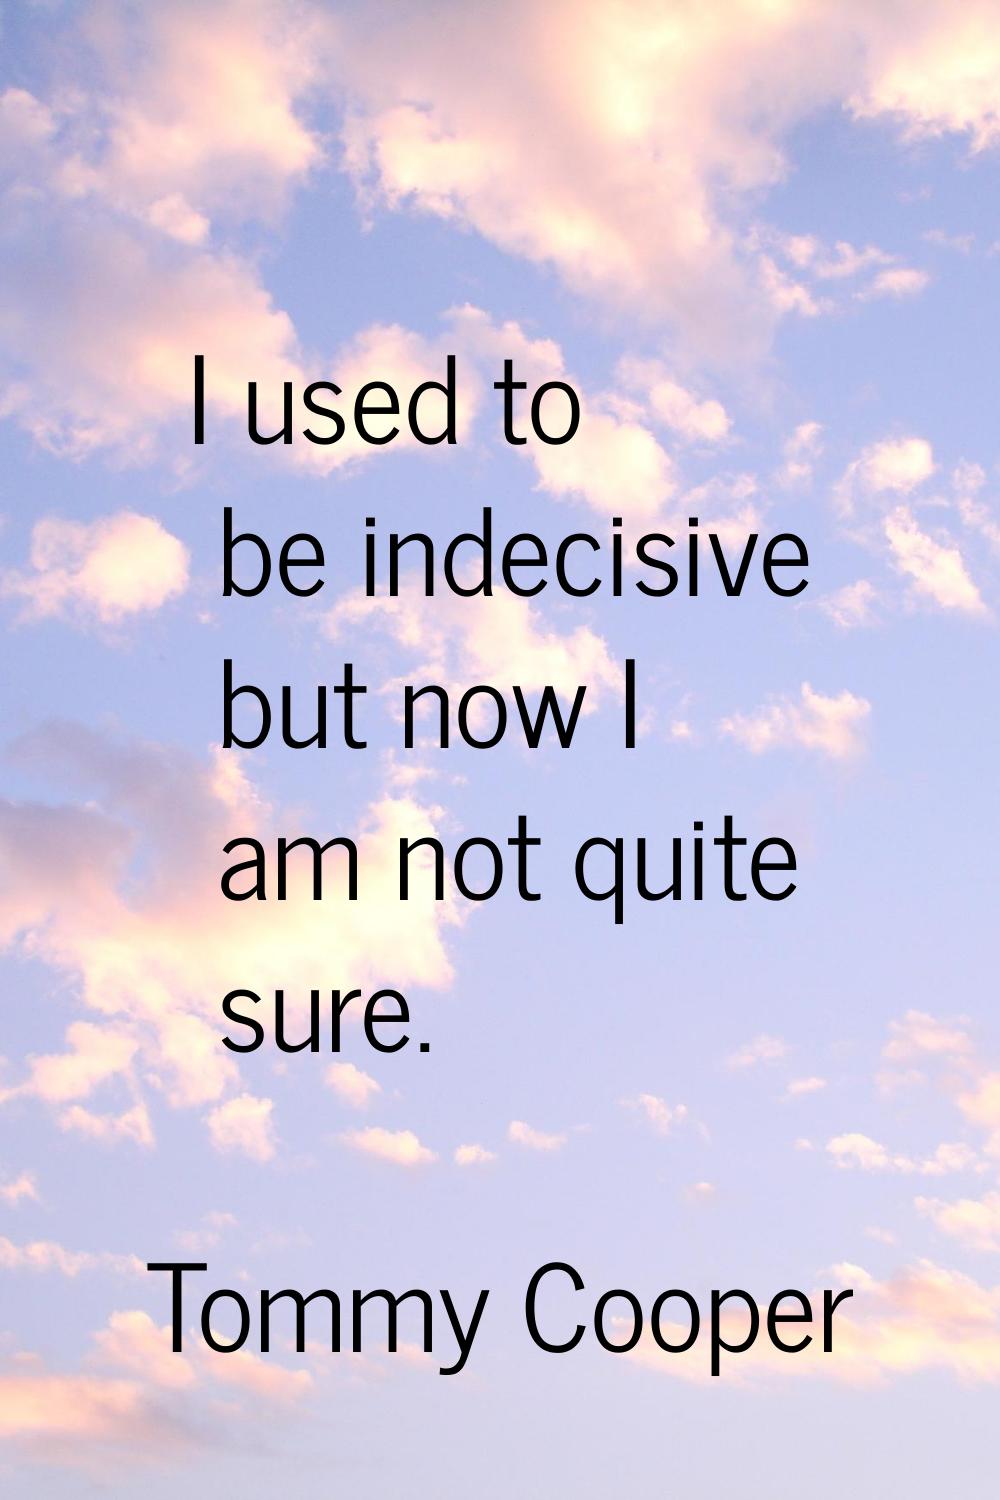 I used to be indecisive but now I am not quite sure.